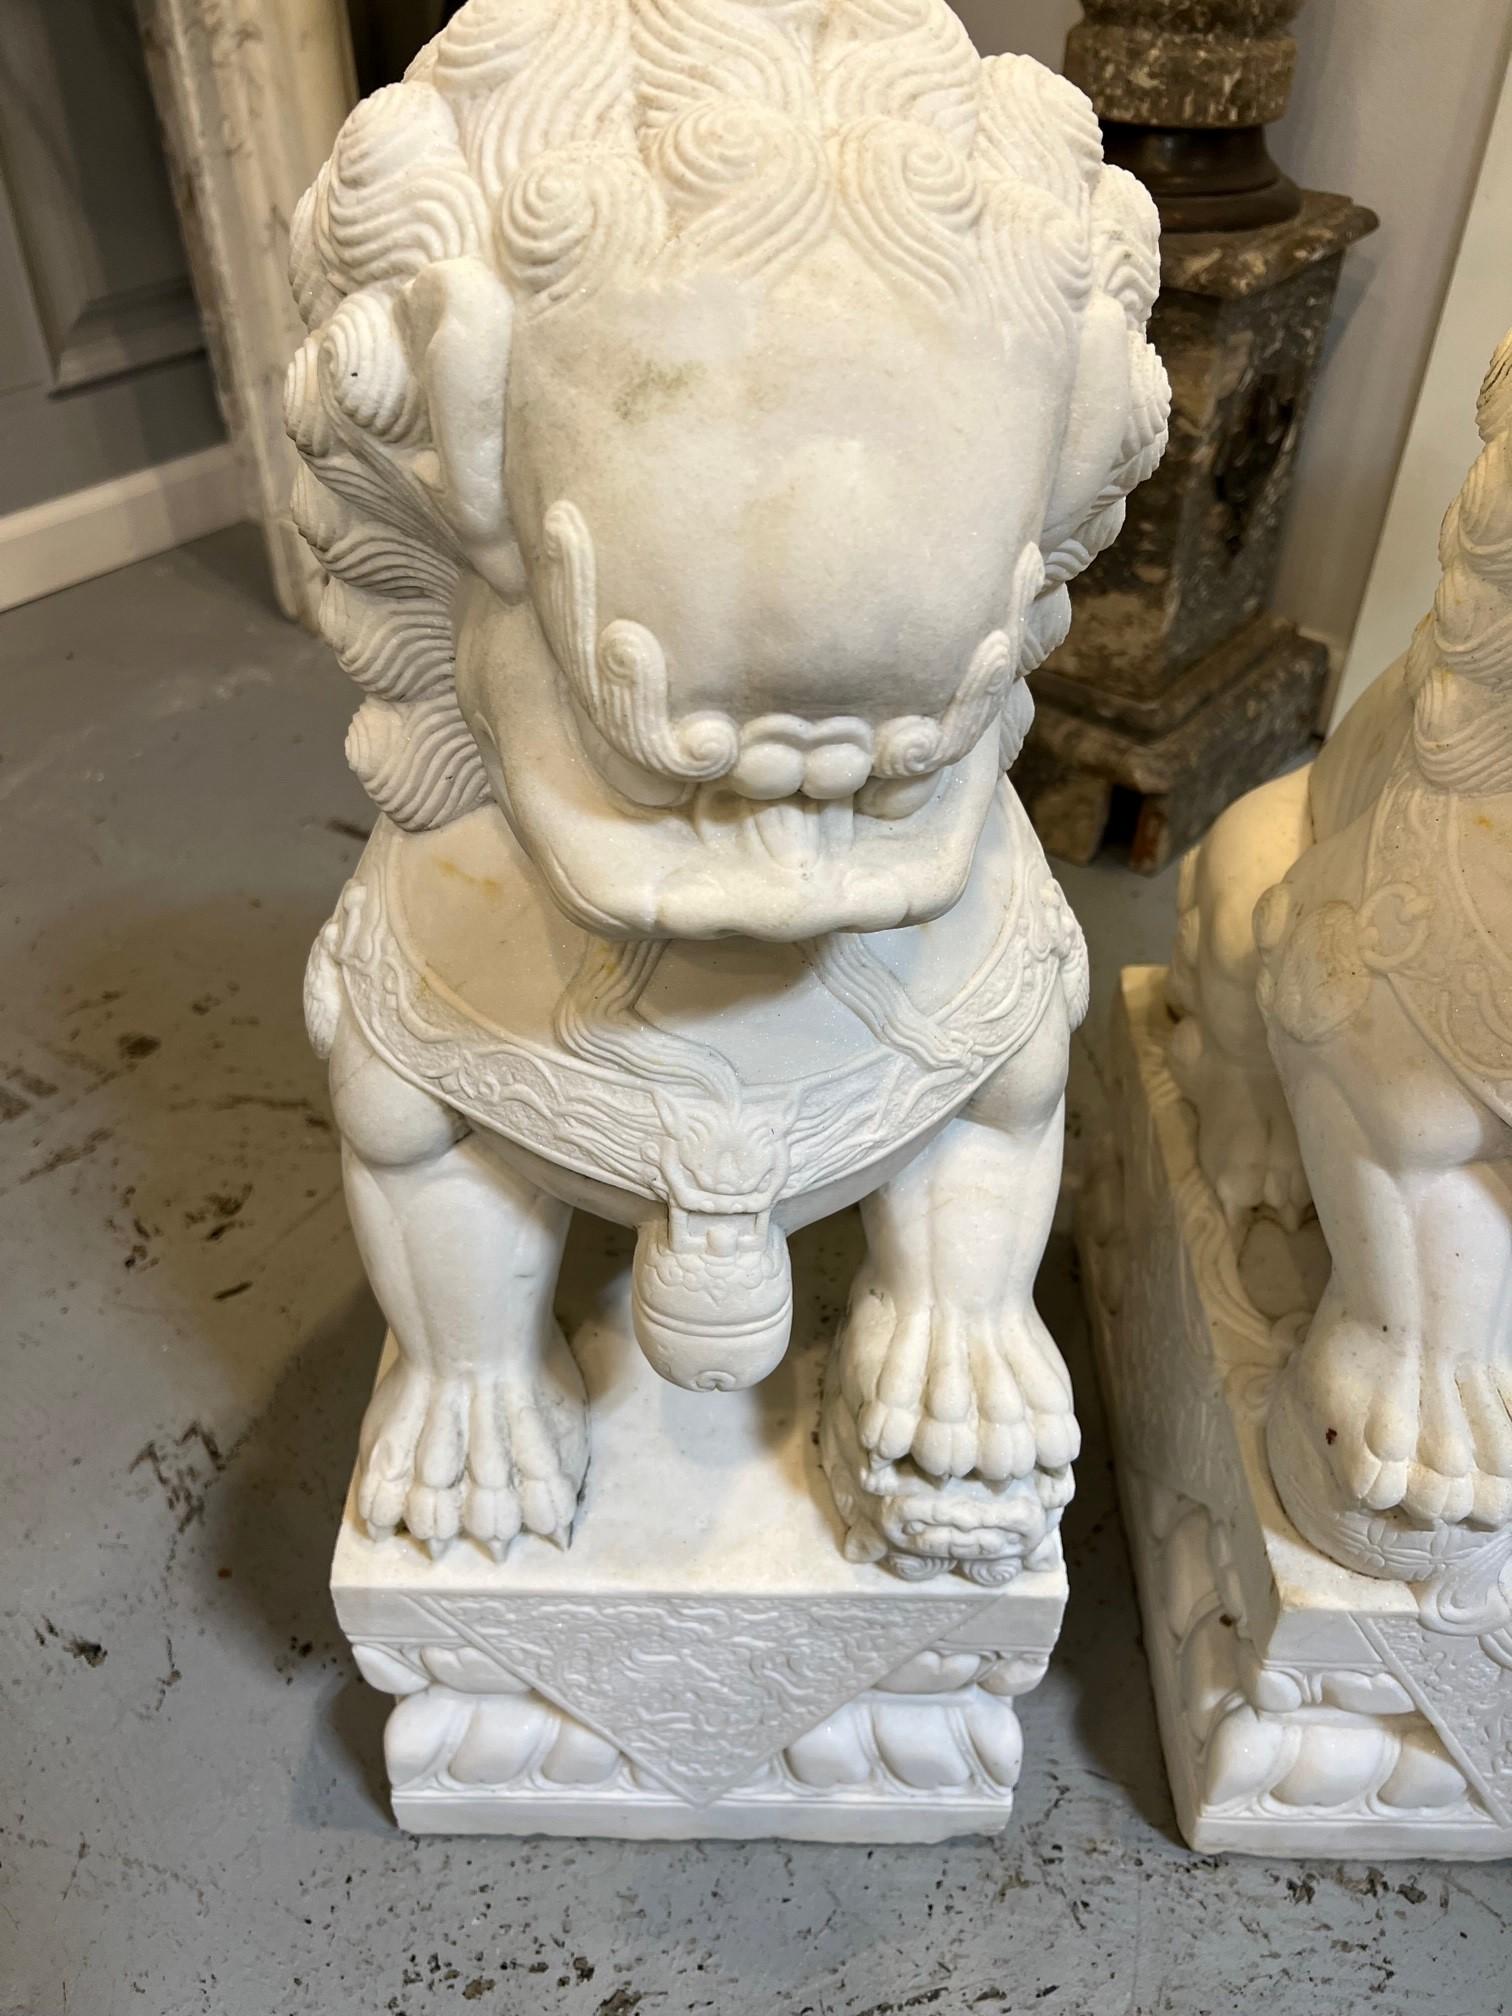 Pair of Marble Foo Dogs, always standing in pairs who serve as guardians to prevent harmful things from happening to the family. Foo Dogs are fantasy lions in Chinese mythology always a pair and always a male and female. The male, with a paw on a